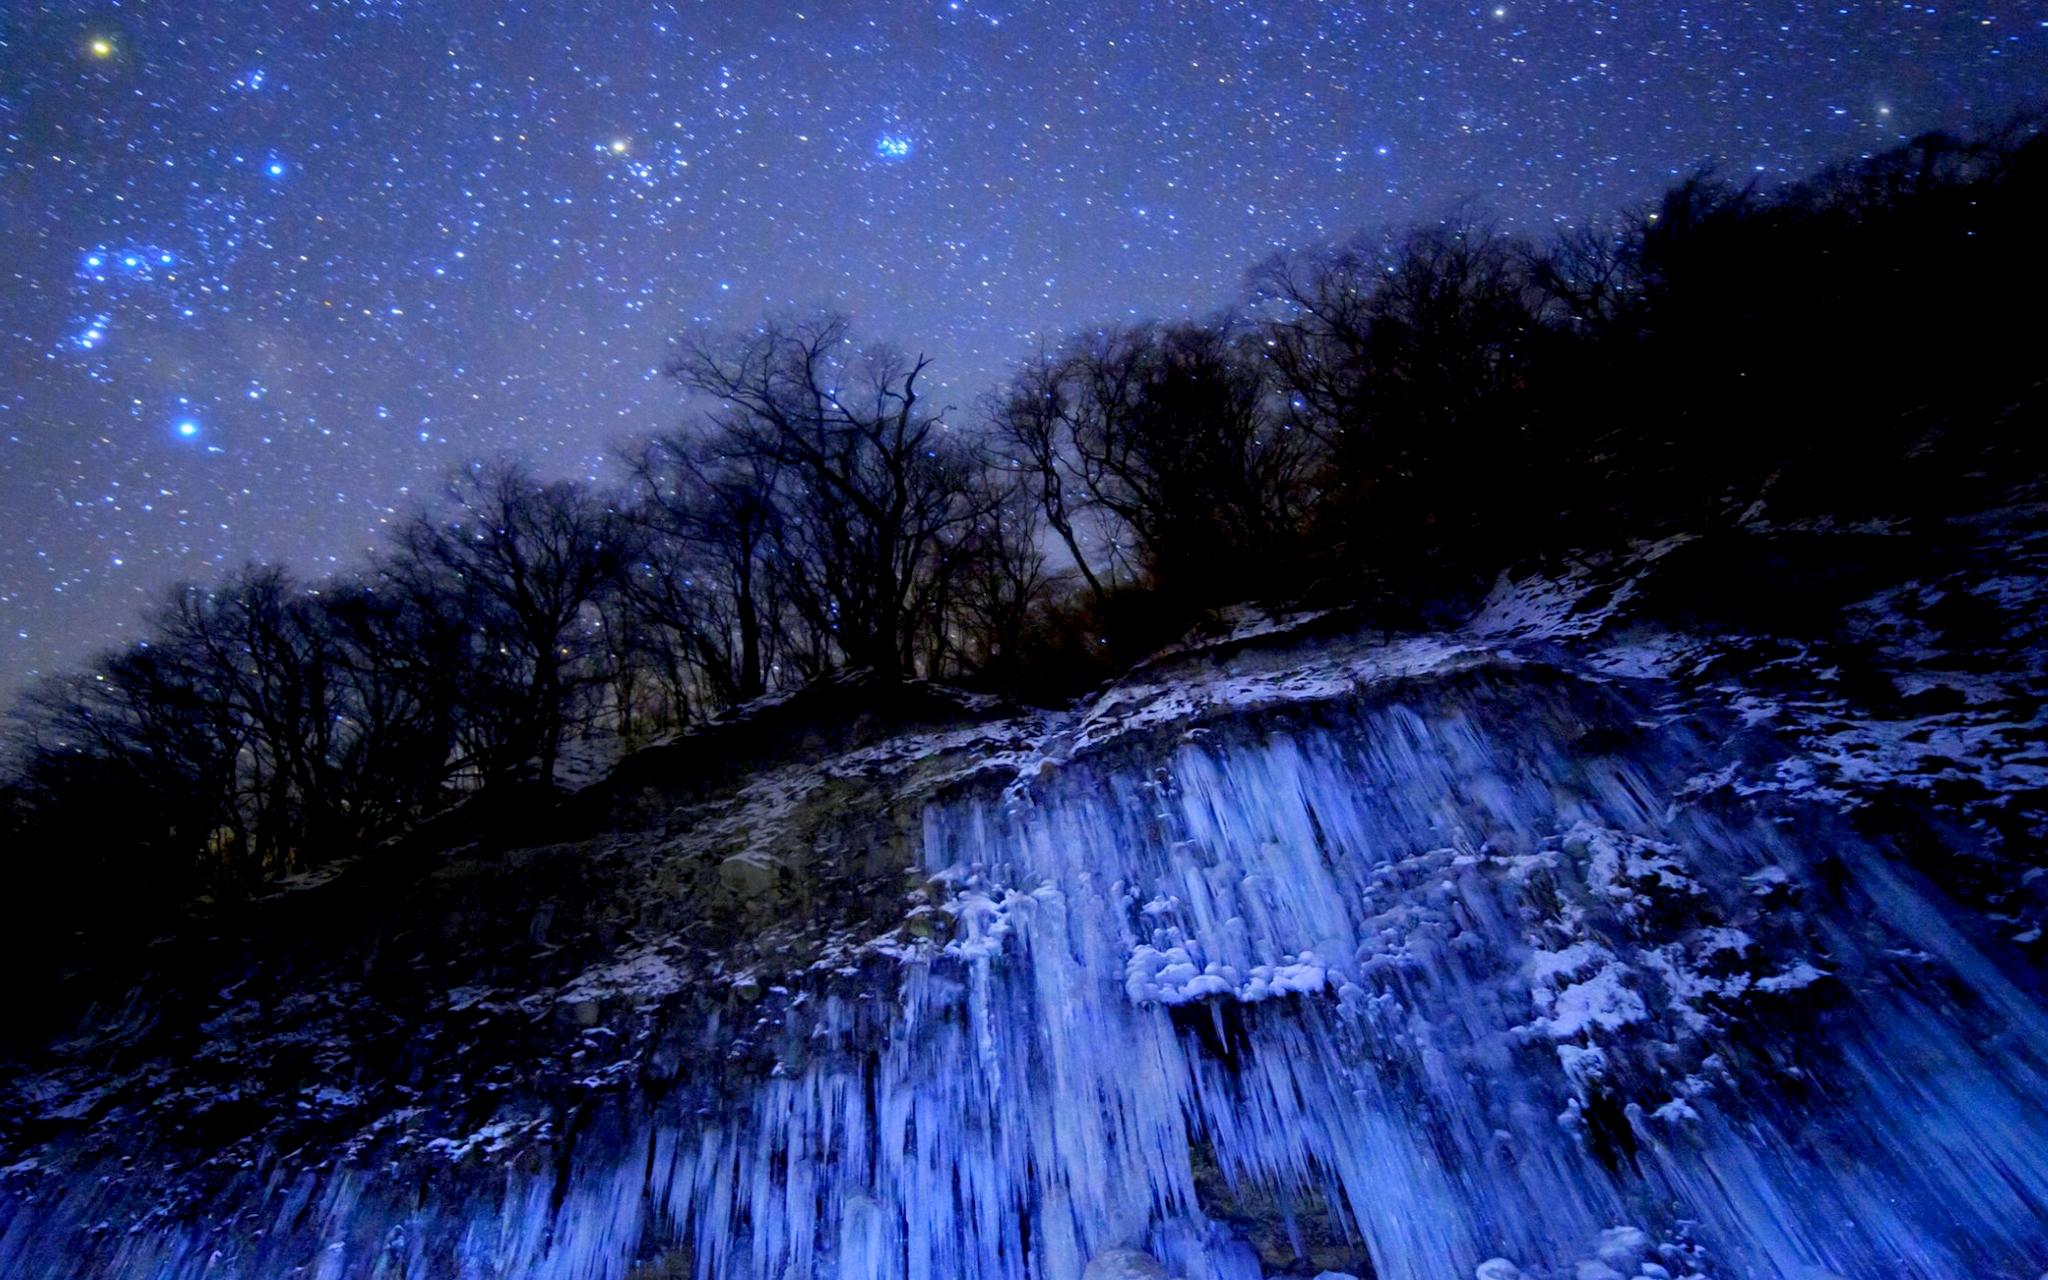 Icy Falls & Starry Night >> HD Wallpaper, get it now!